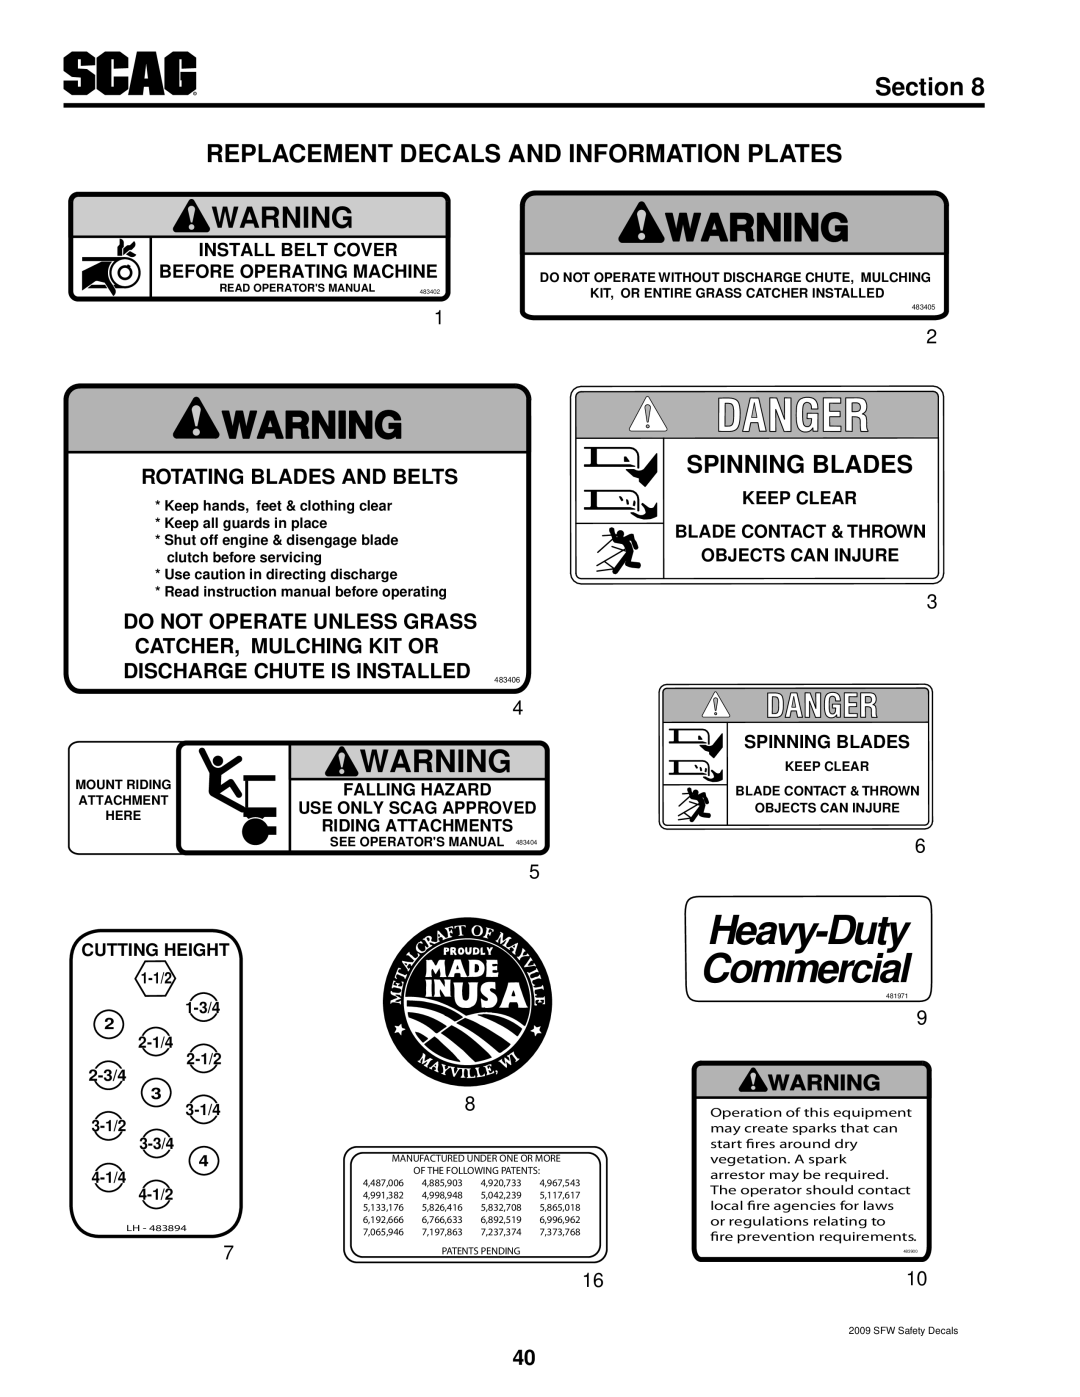 Scag Power Equipment SFW36-16BV Replacement Decals and Information Plates, Spinning Blades, Rotating Blades and Belts 